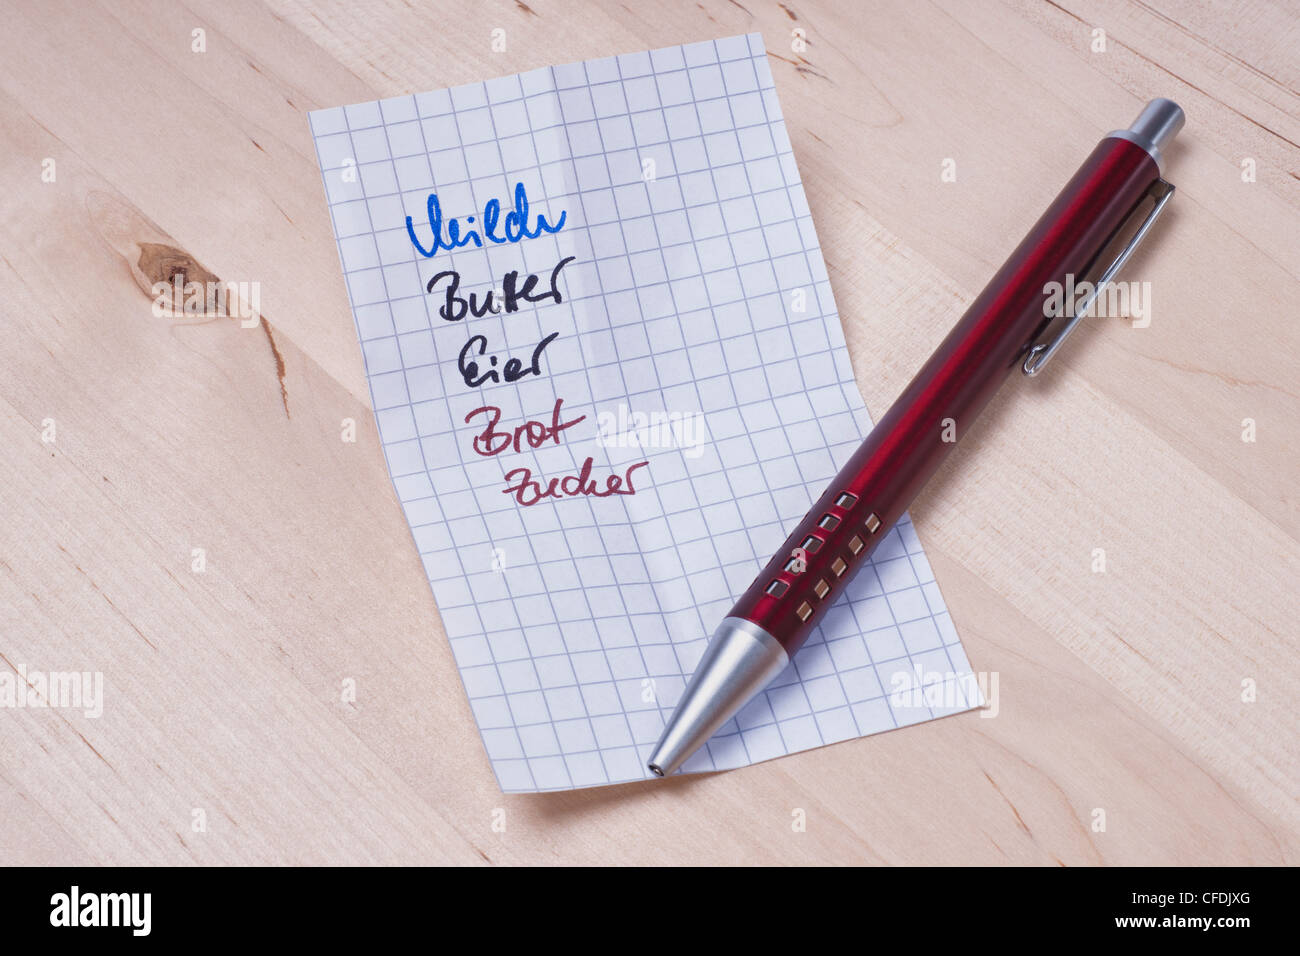 Detail photo of a Shopping list in German language with milk butter eggs bread sugar Stock Photo